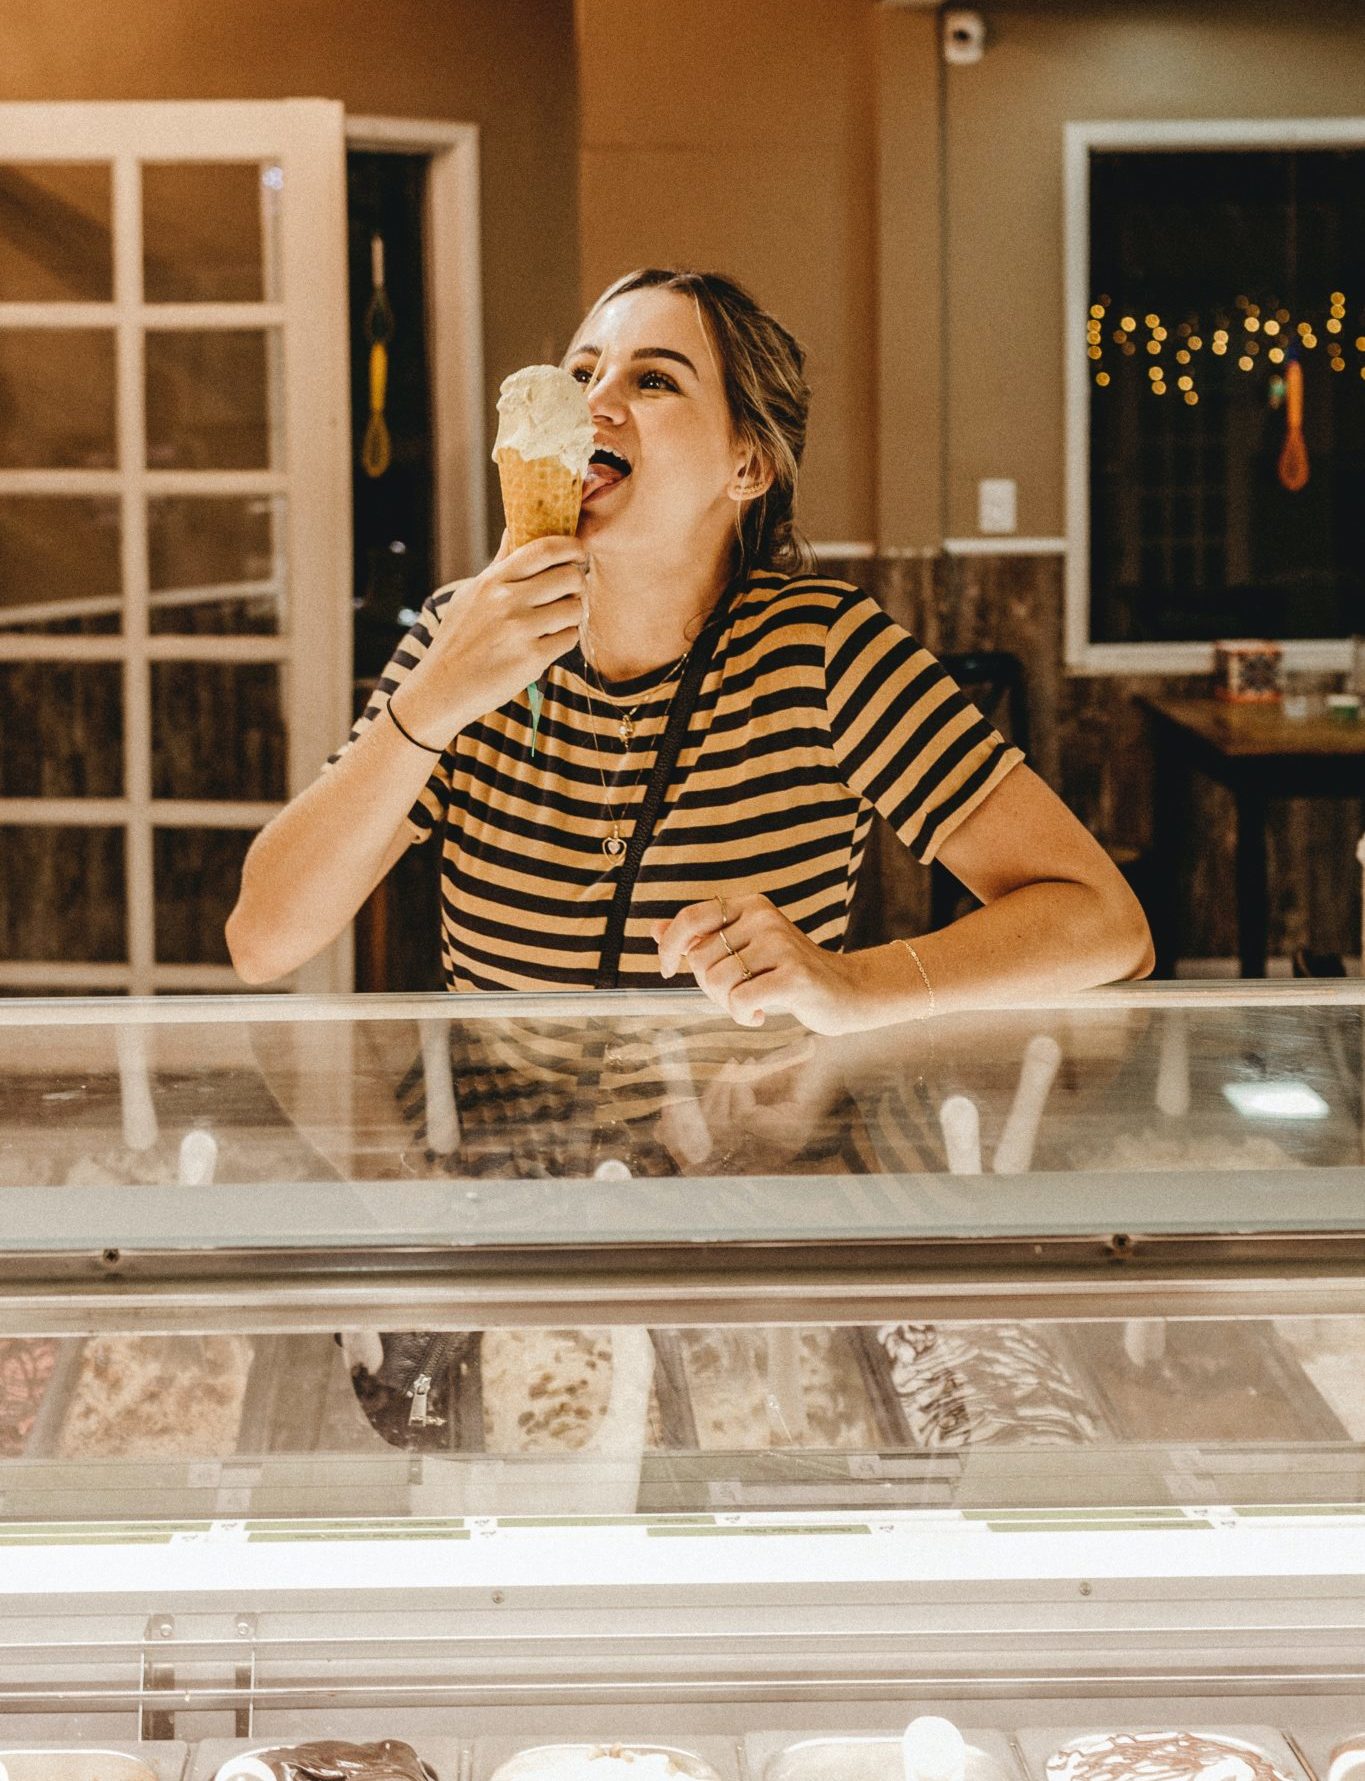 person happily eating ice cream